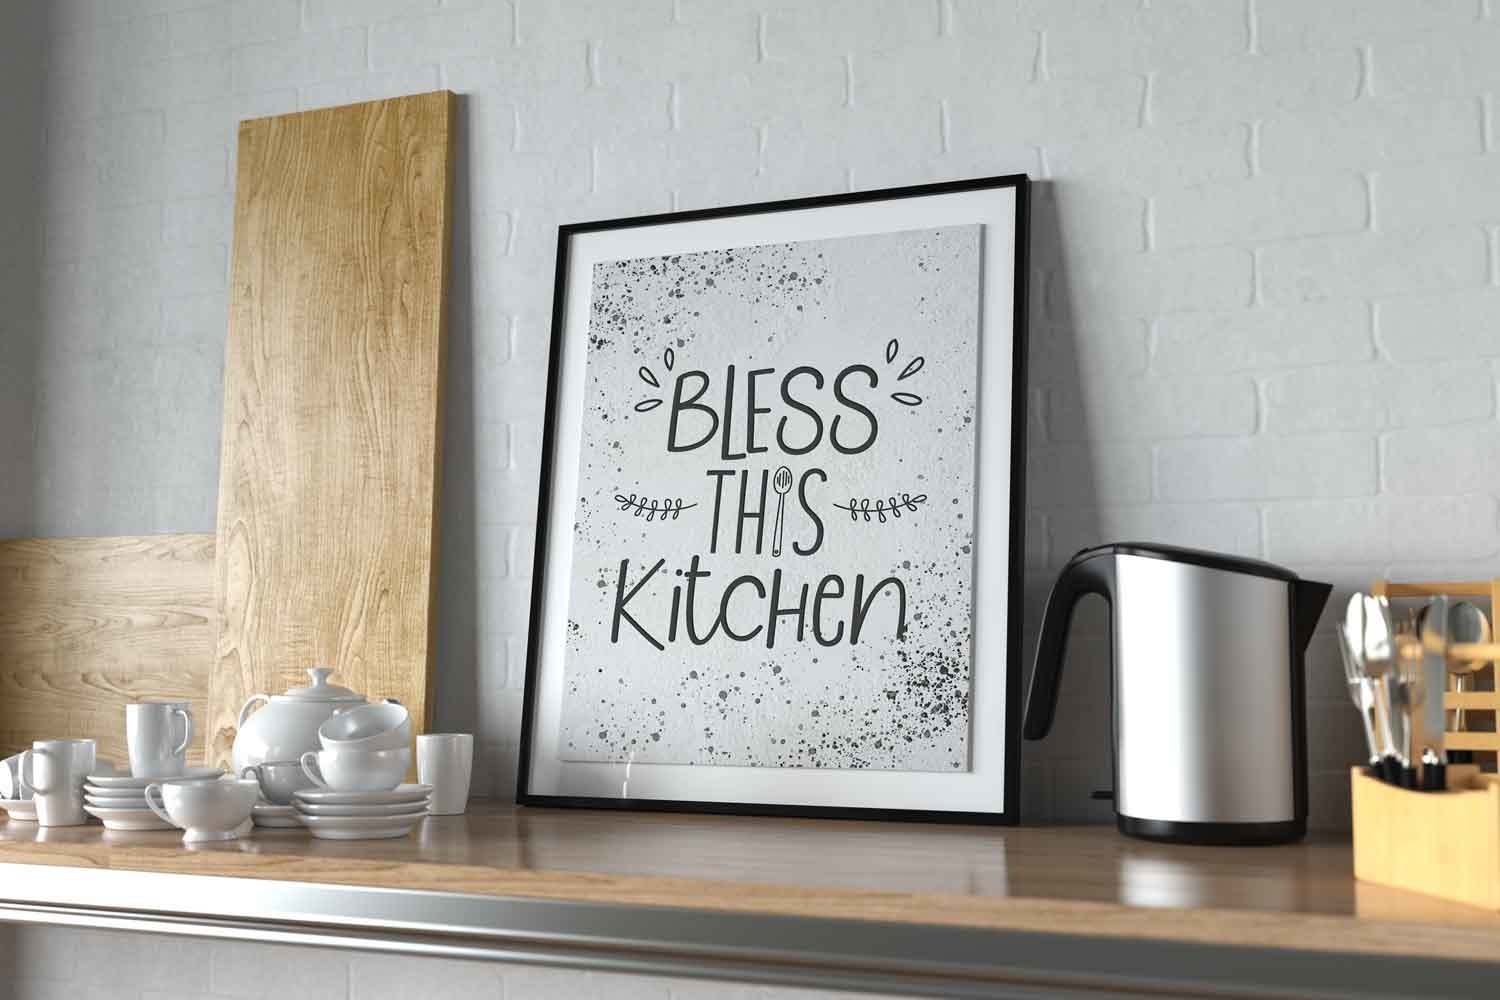 Nice simple poster for kitchen.